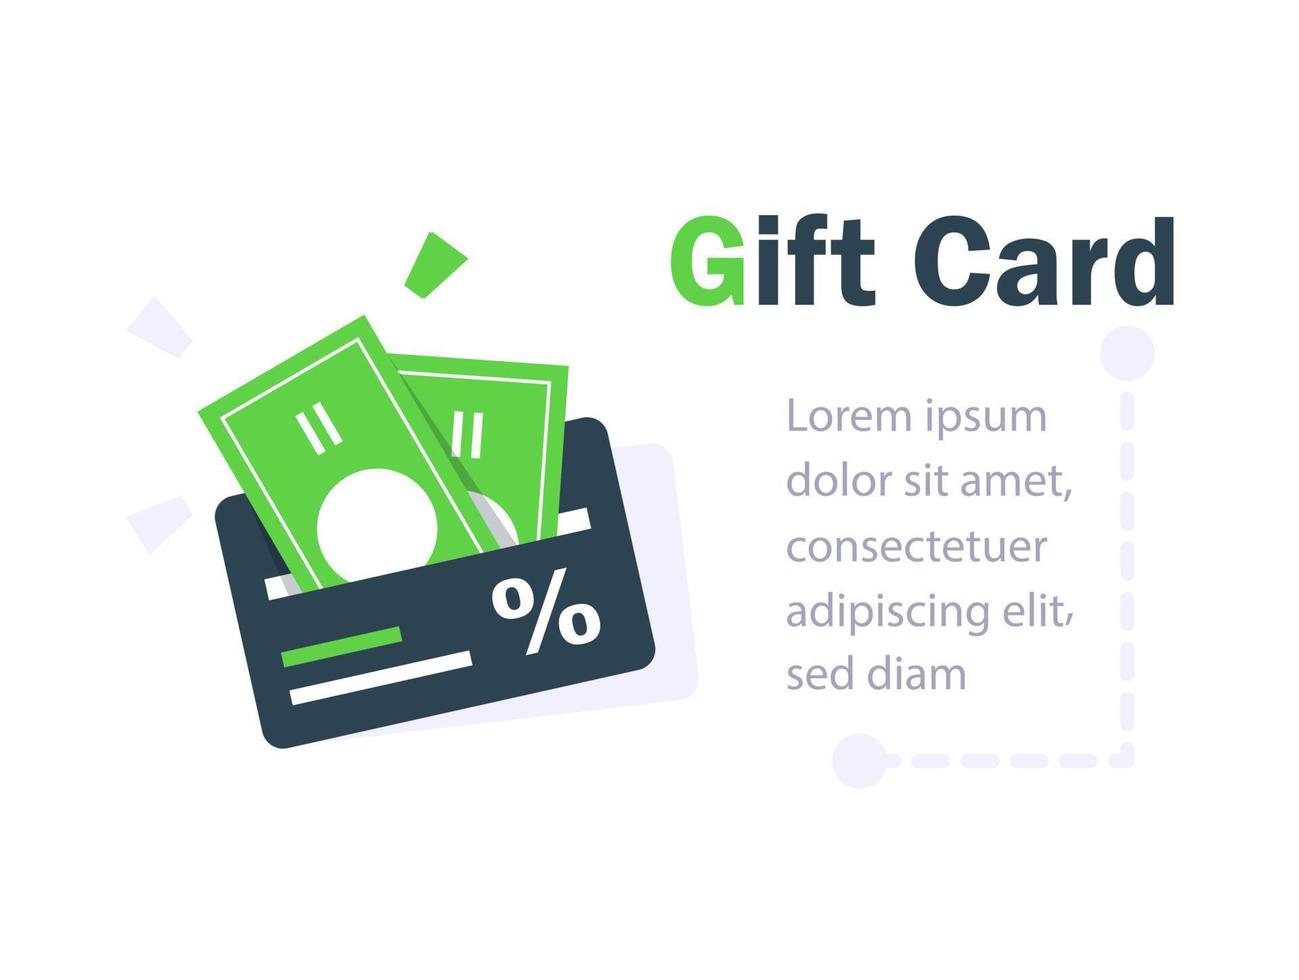 Gift card,redeem present box, more discount, perks concept,loyalty program, earn points vector